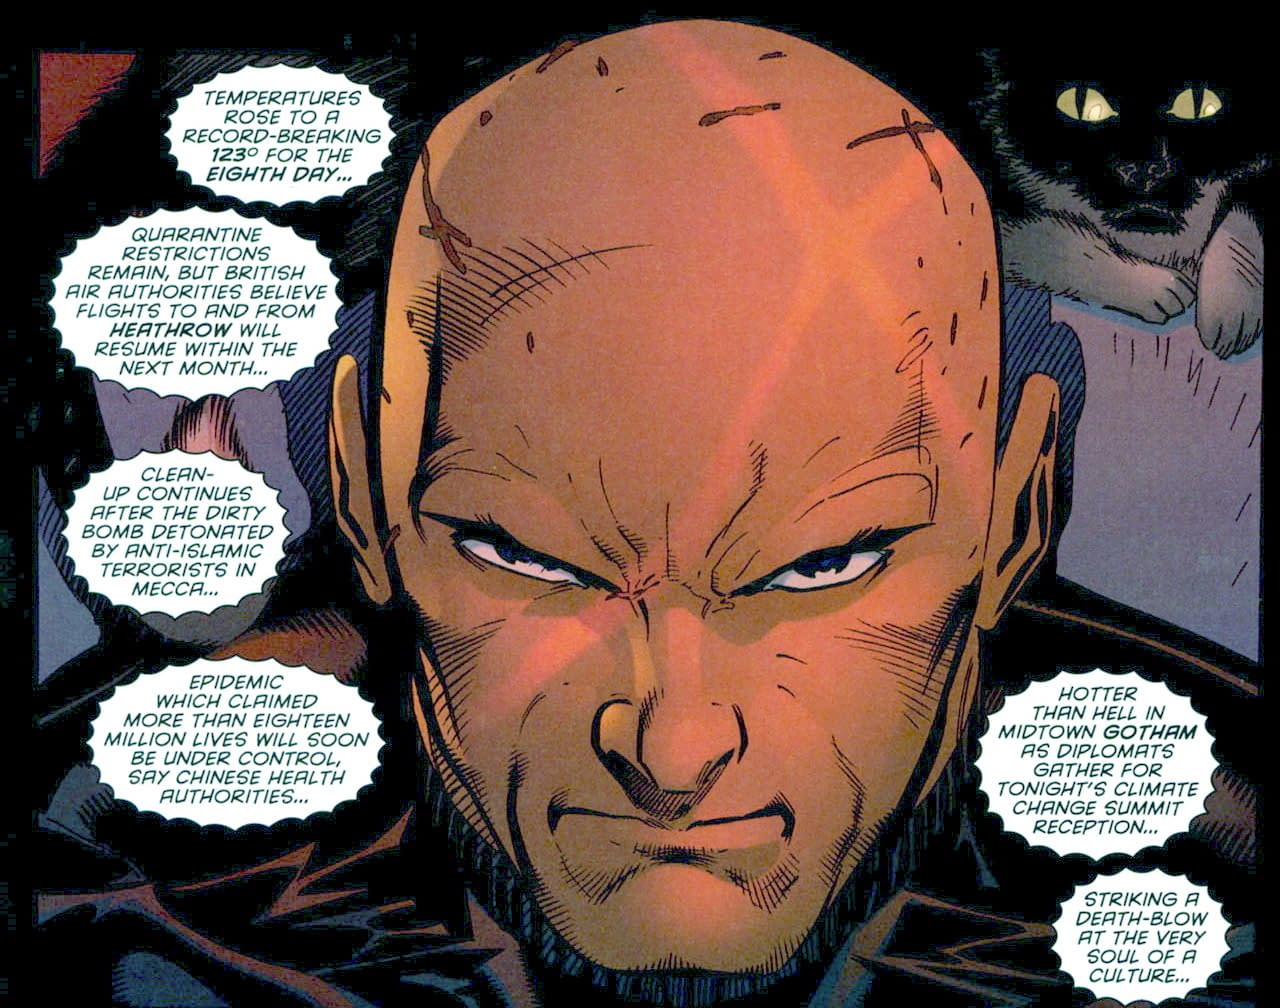 Grant Morrison Predicted Events Of 2020 and 2021 In 2007's Batman